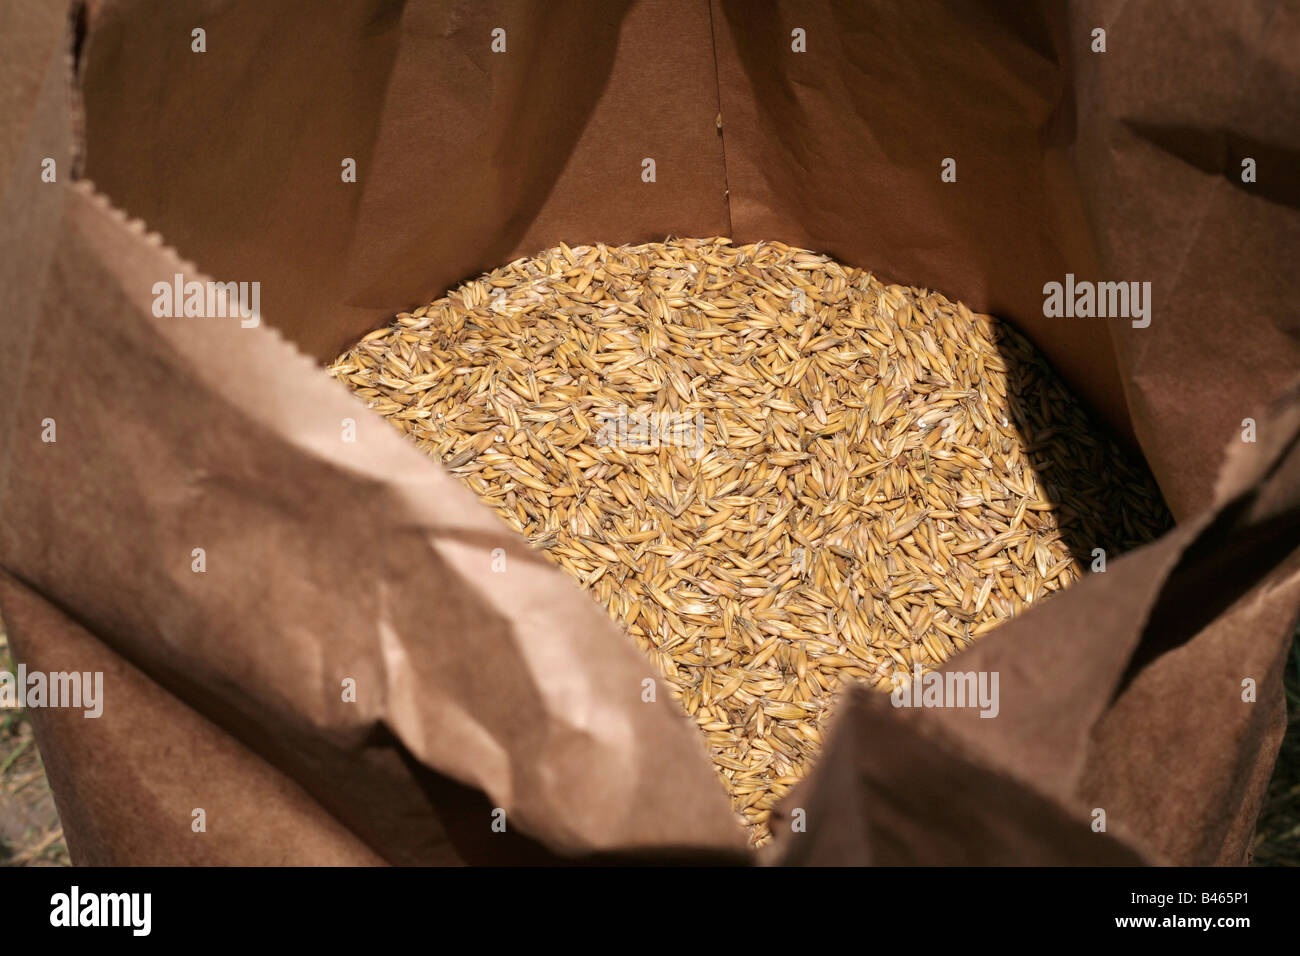 Threshed oats in a sack Stock Photo